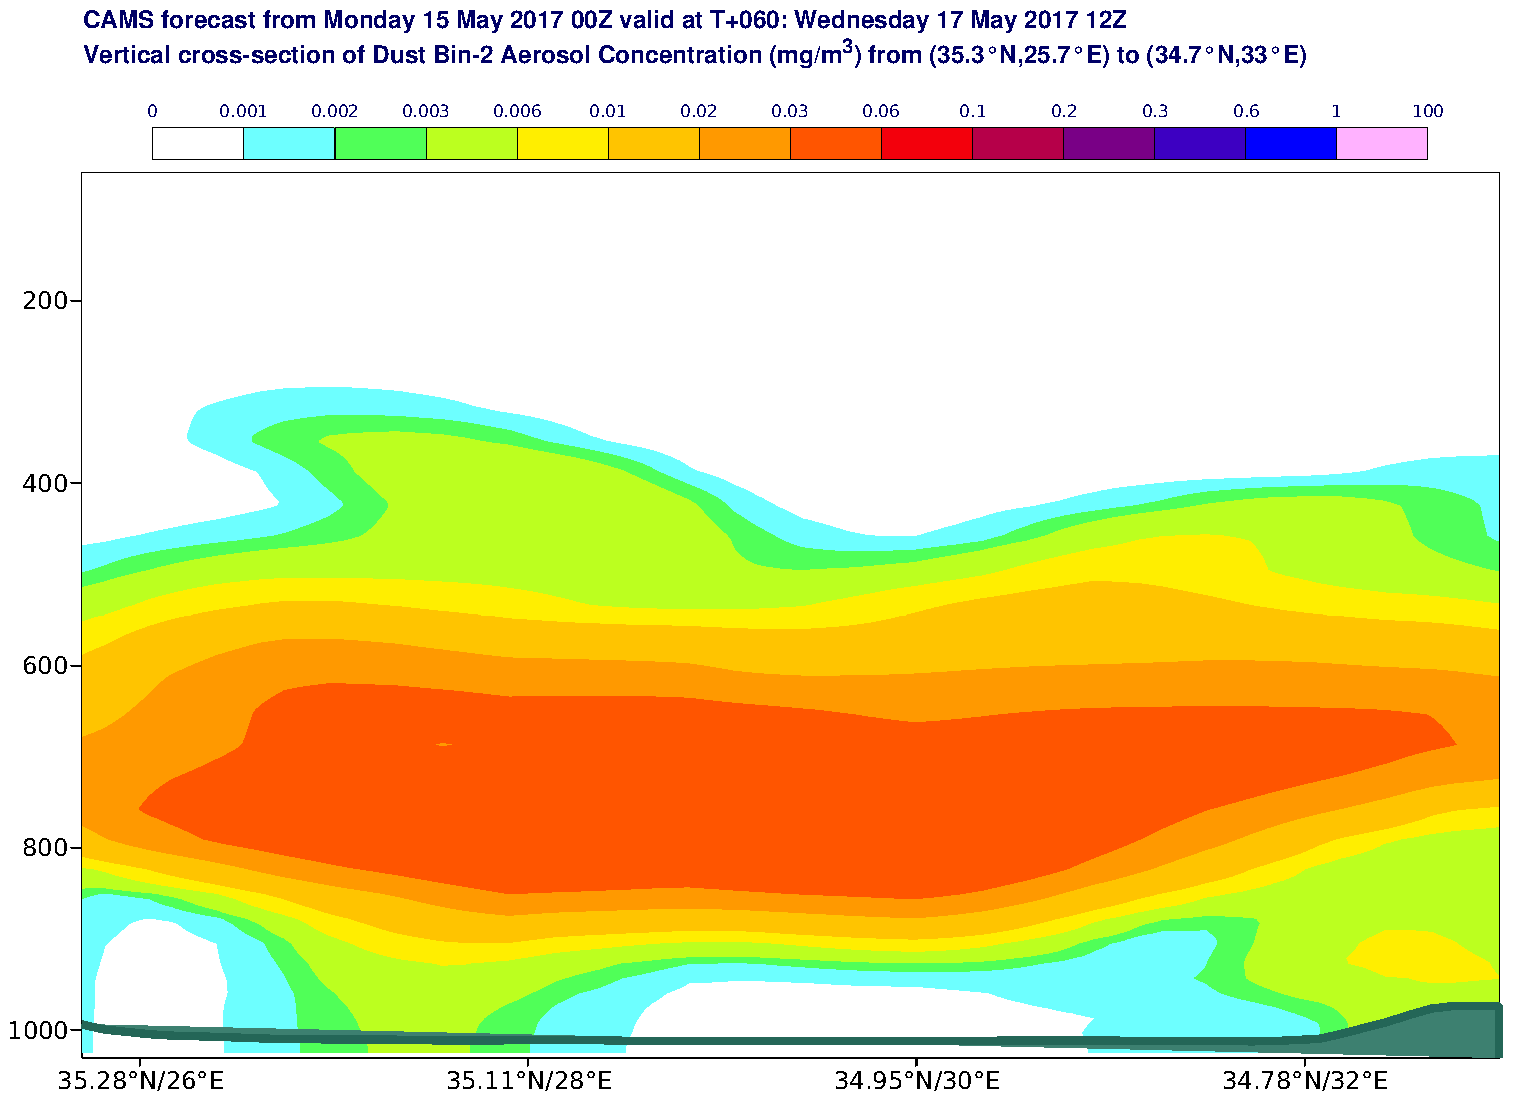 Vertical cross-section of Dust Bin-2 Aerosol Concentration (mg/m3) valid at T60 - 2017-05-17 12:00